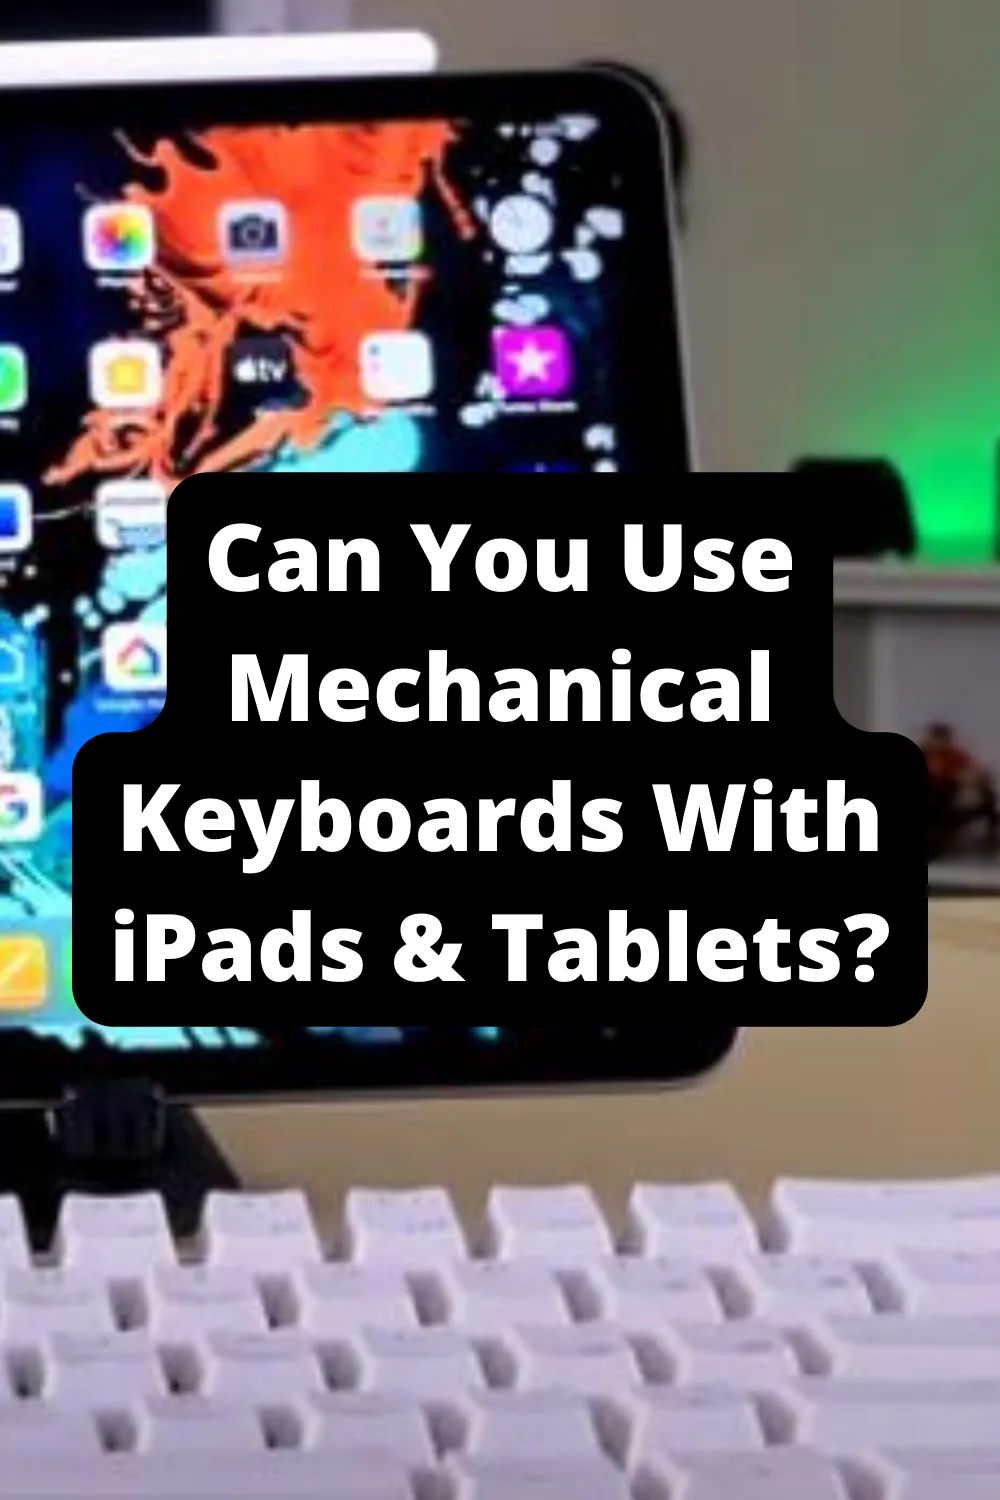 Can You Use Mechanical Keyboards With iPads & Tablets?